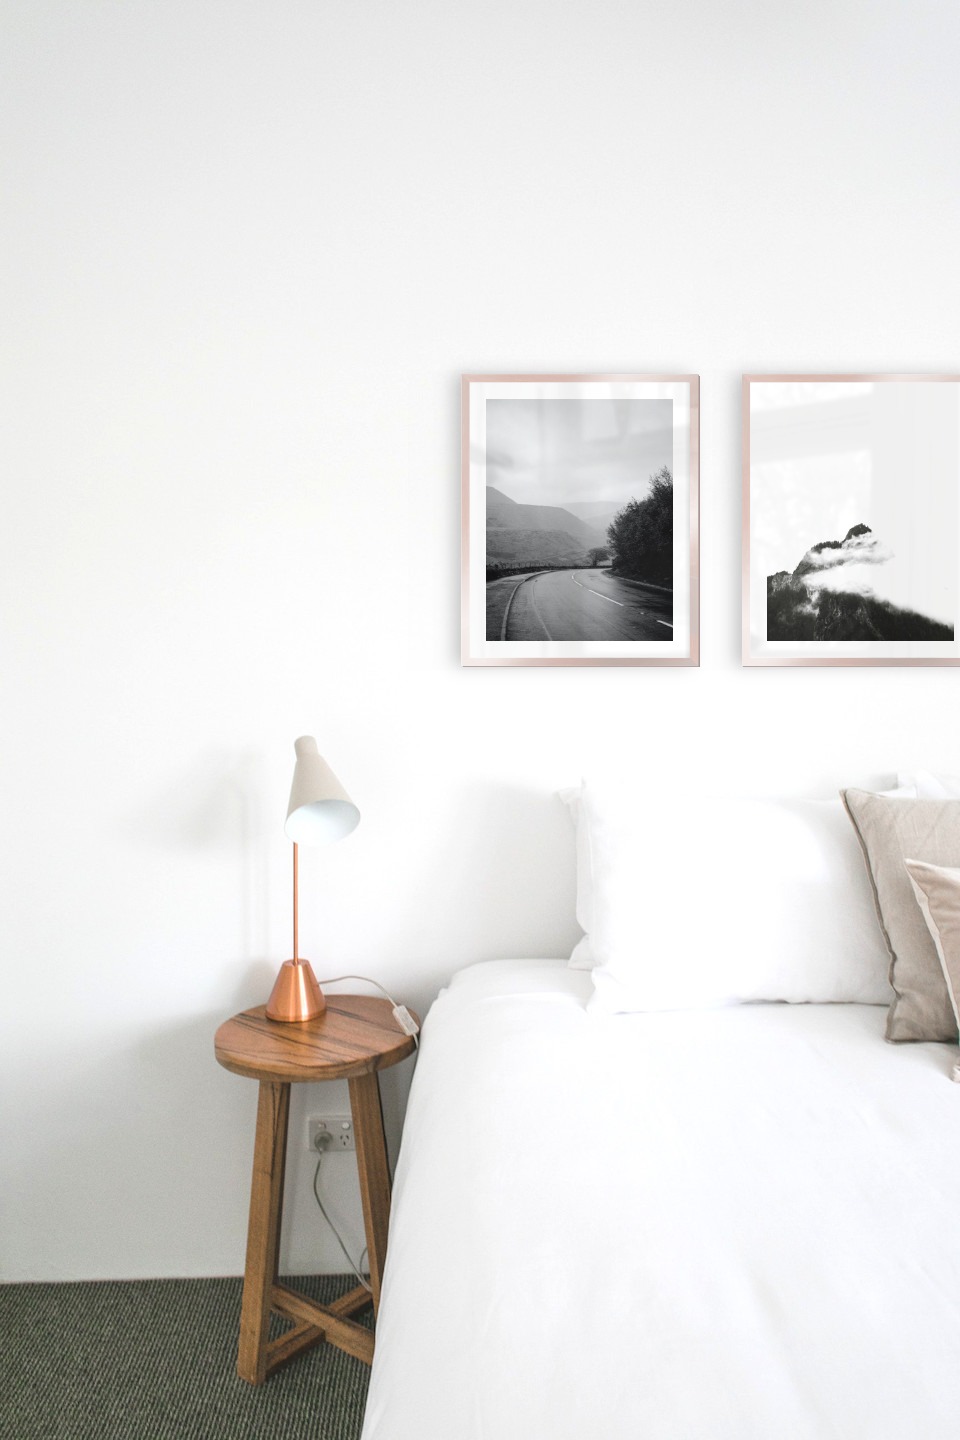 Gallery wall with picture frames in copper in sizes 40x50 with prints "Road that turns" and "Mountain peaks in fog"